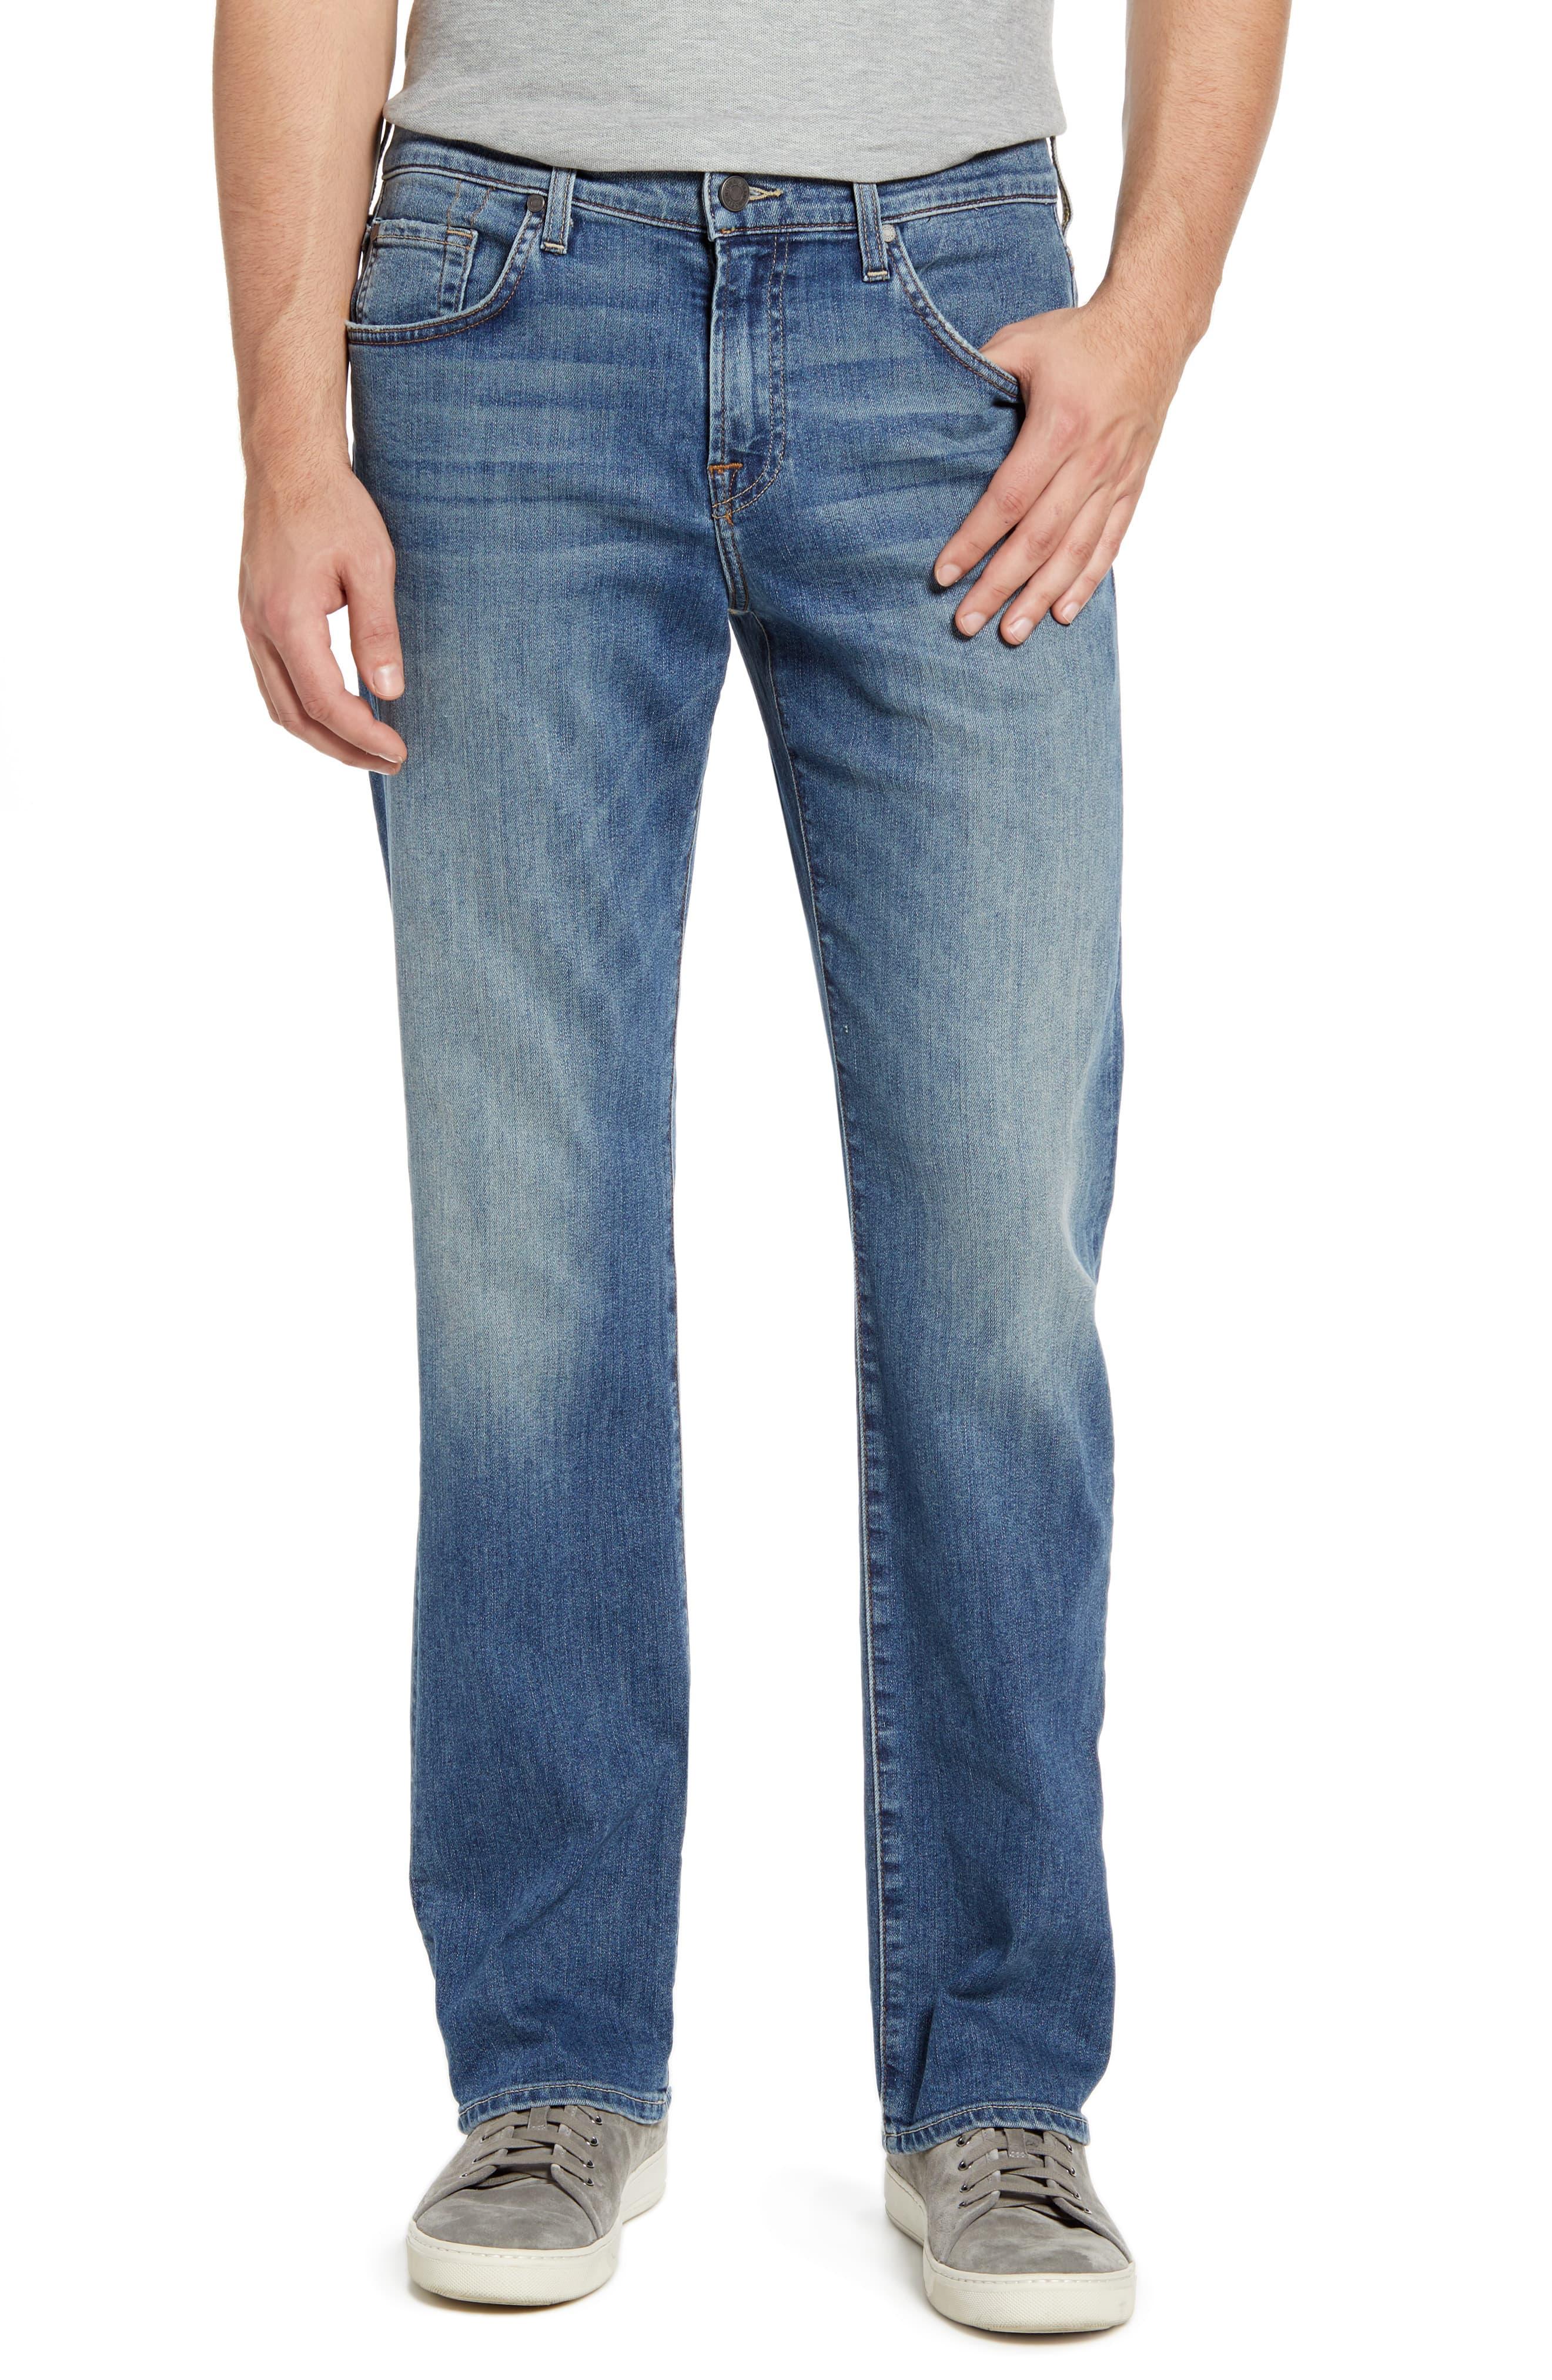 7 For All Mankind Denim 7 For All Mankind Austyn Relaxed Fit Jeans in ...